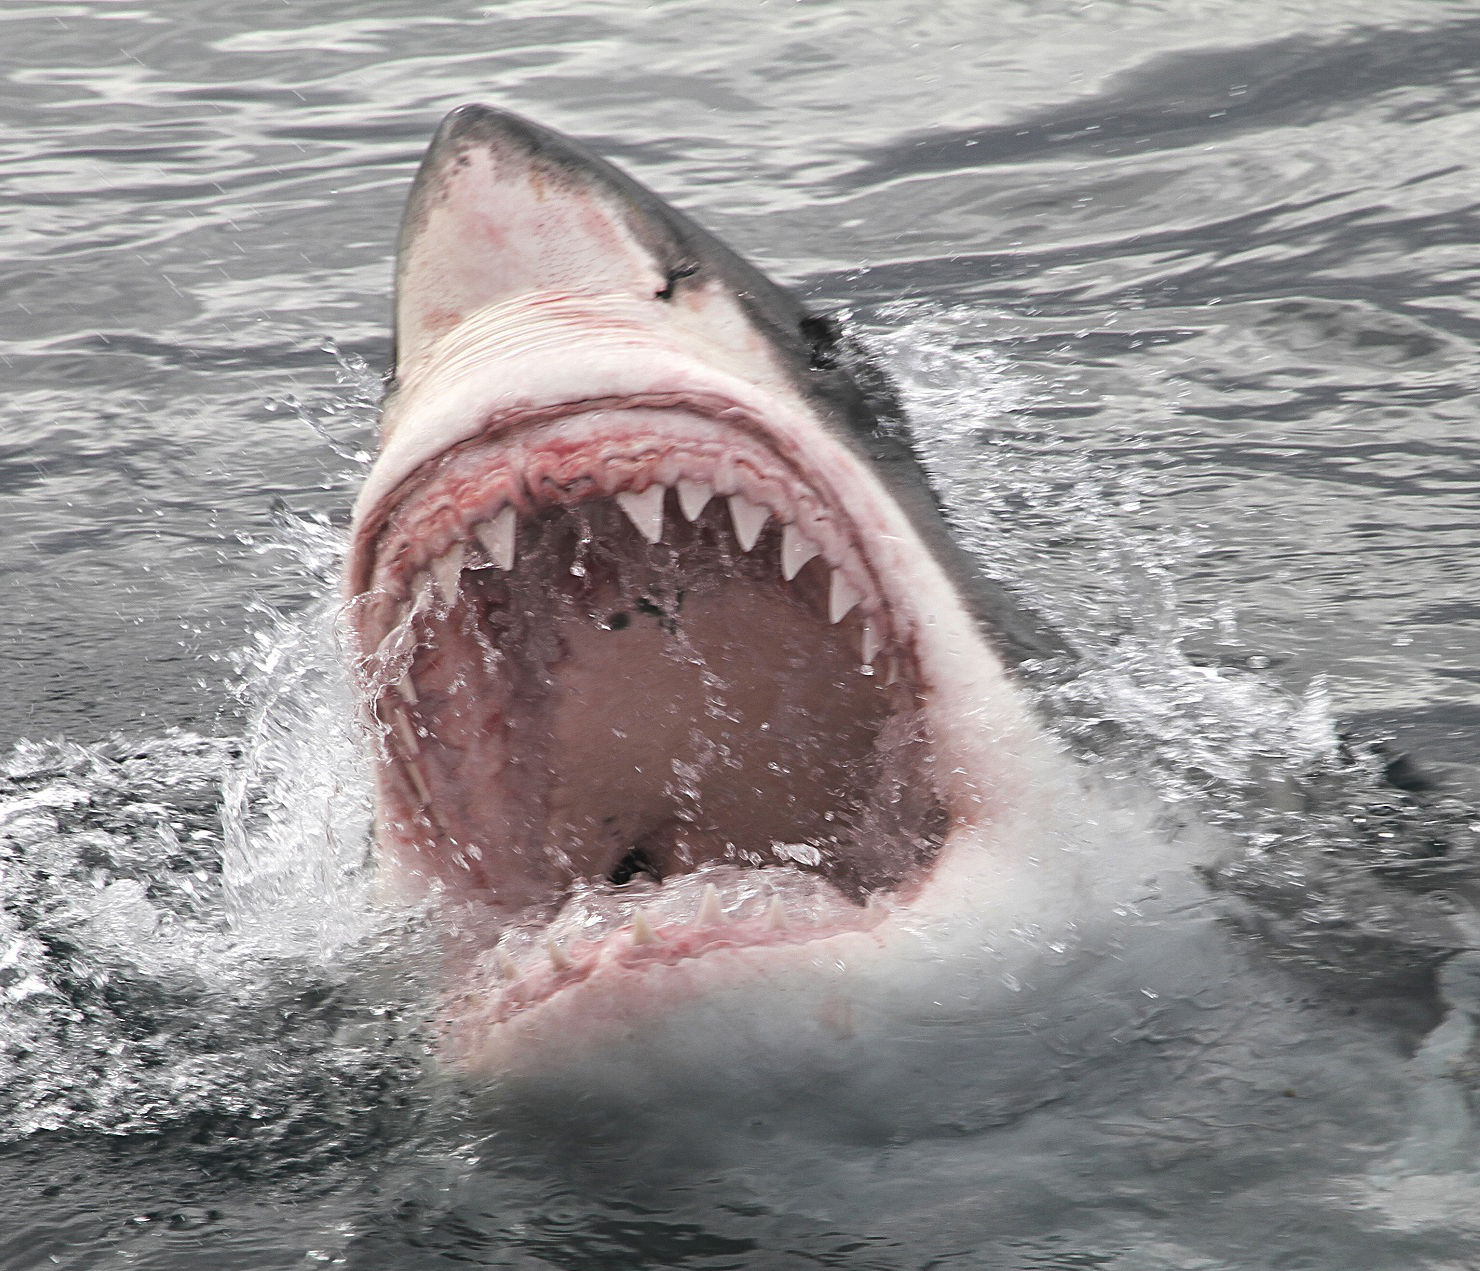 Image of a great white shark